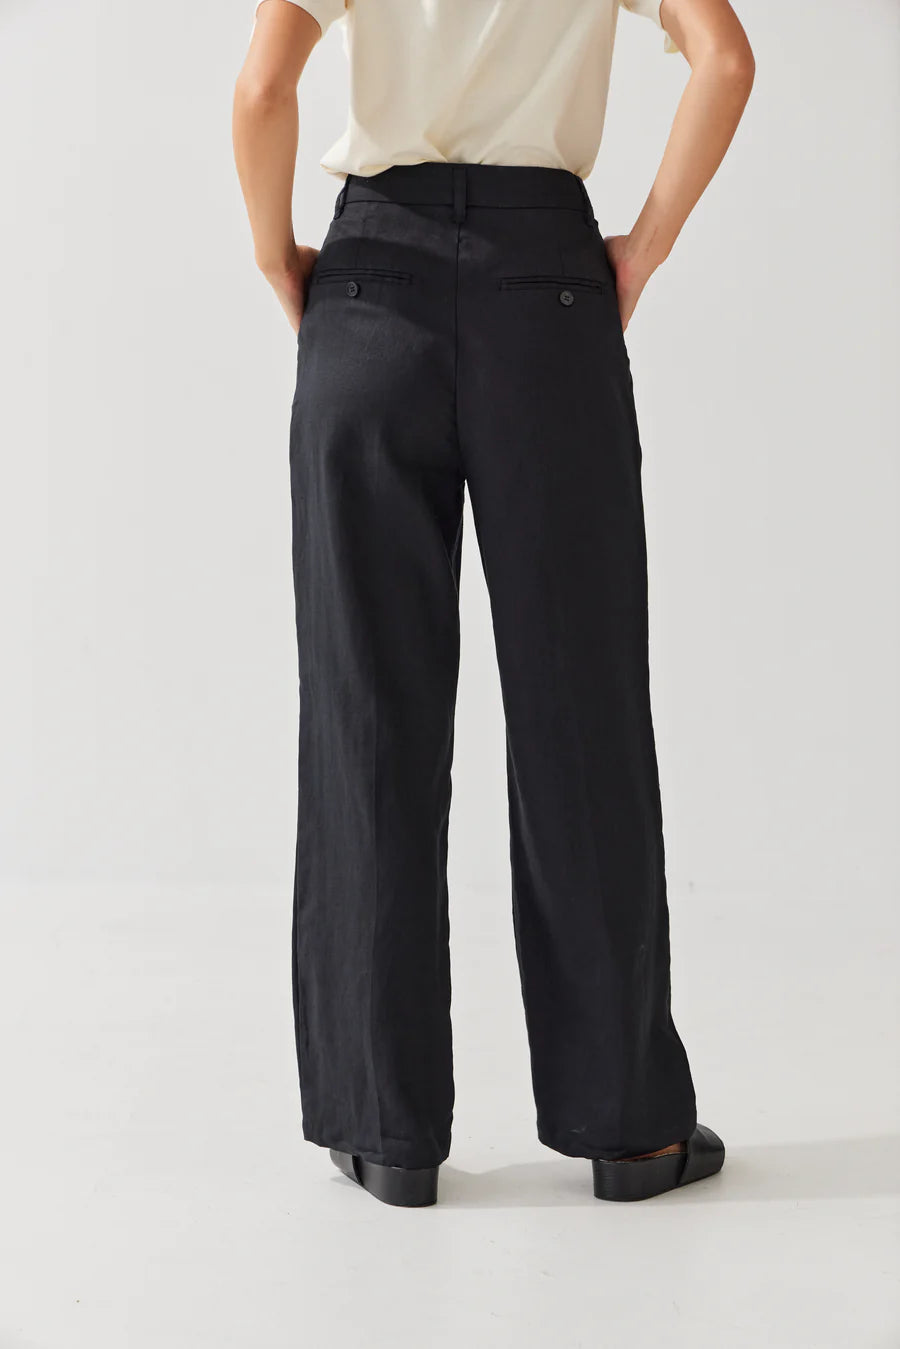 TUESDAY LABEL - Olympia Pant (Black Linen)